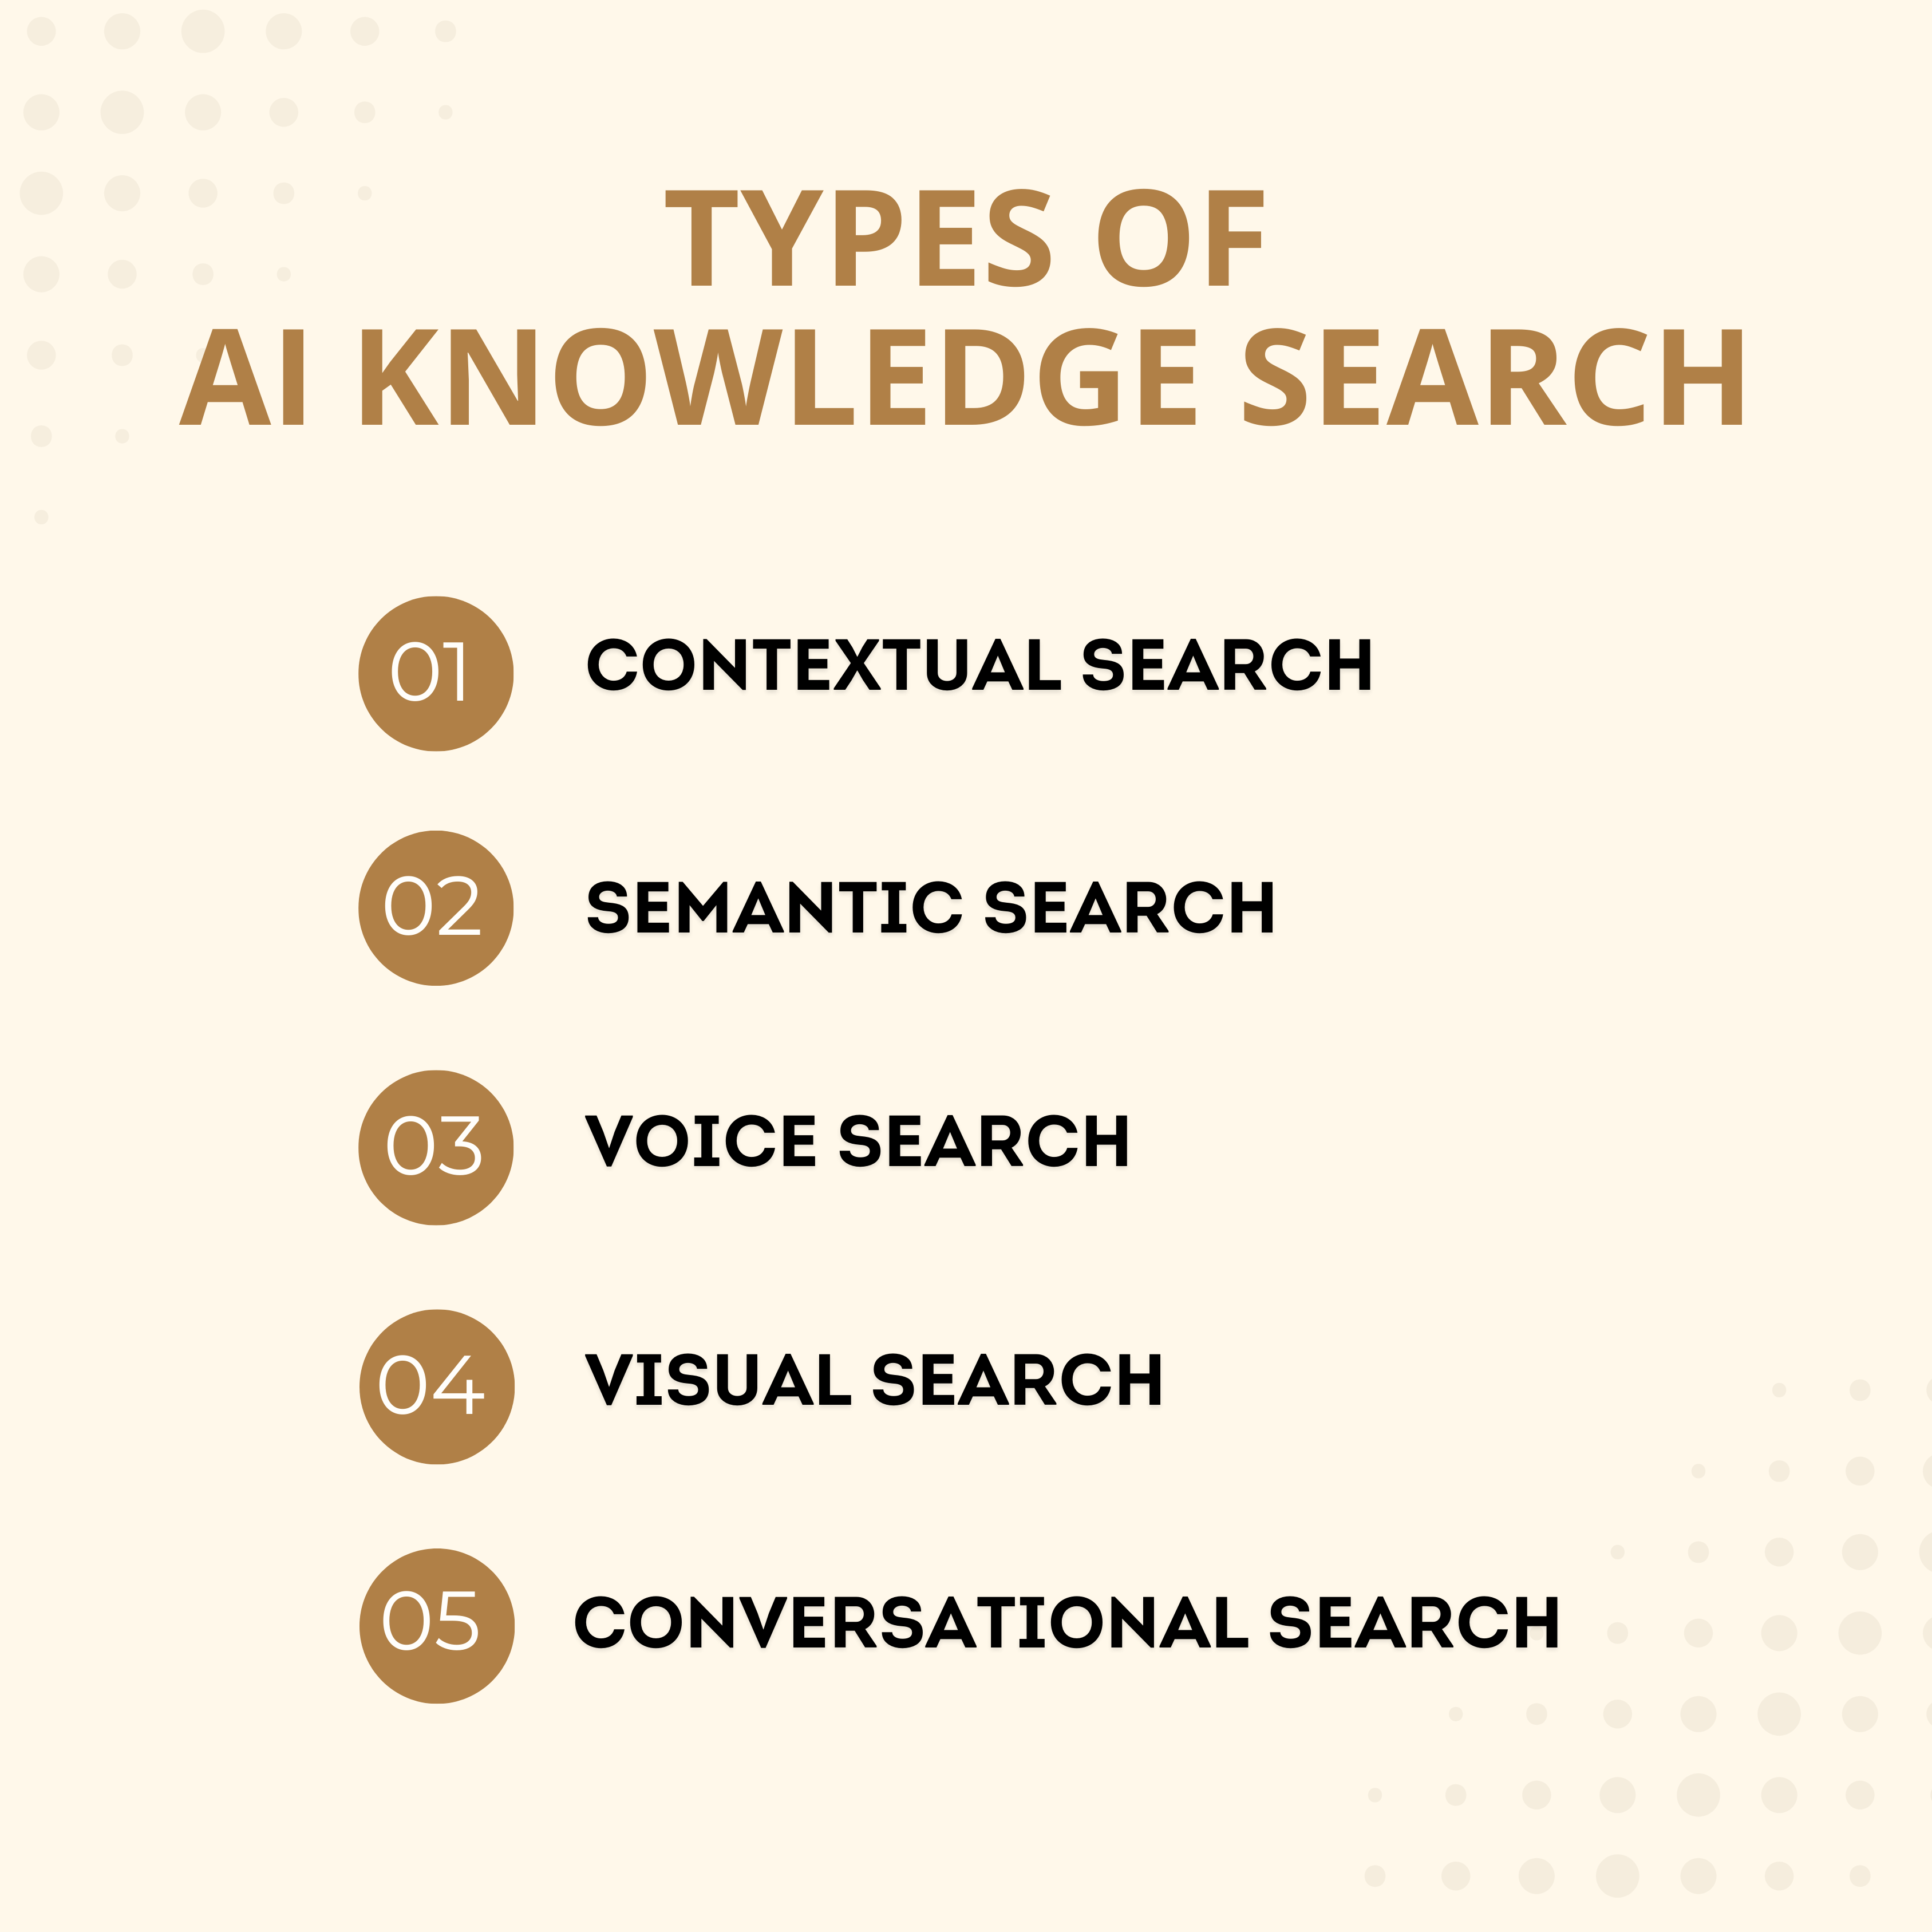 Types of AI Knowledge Search